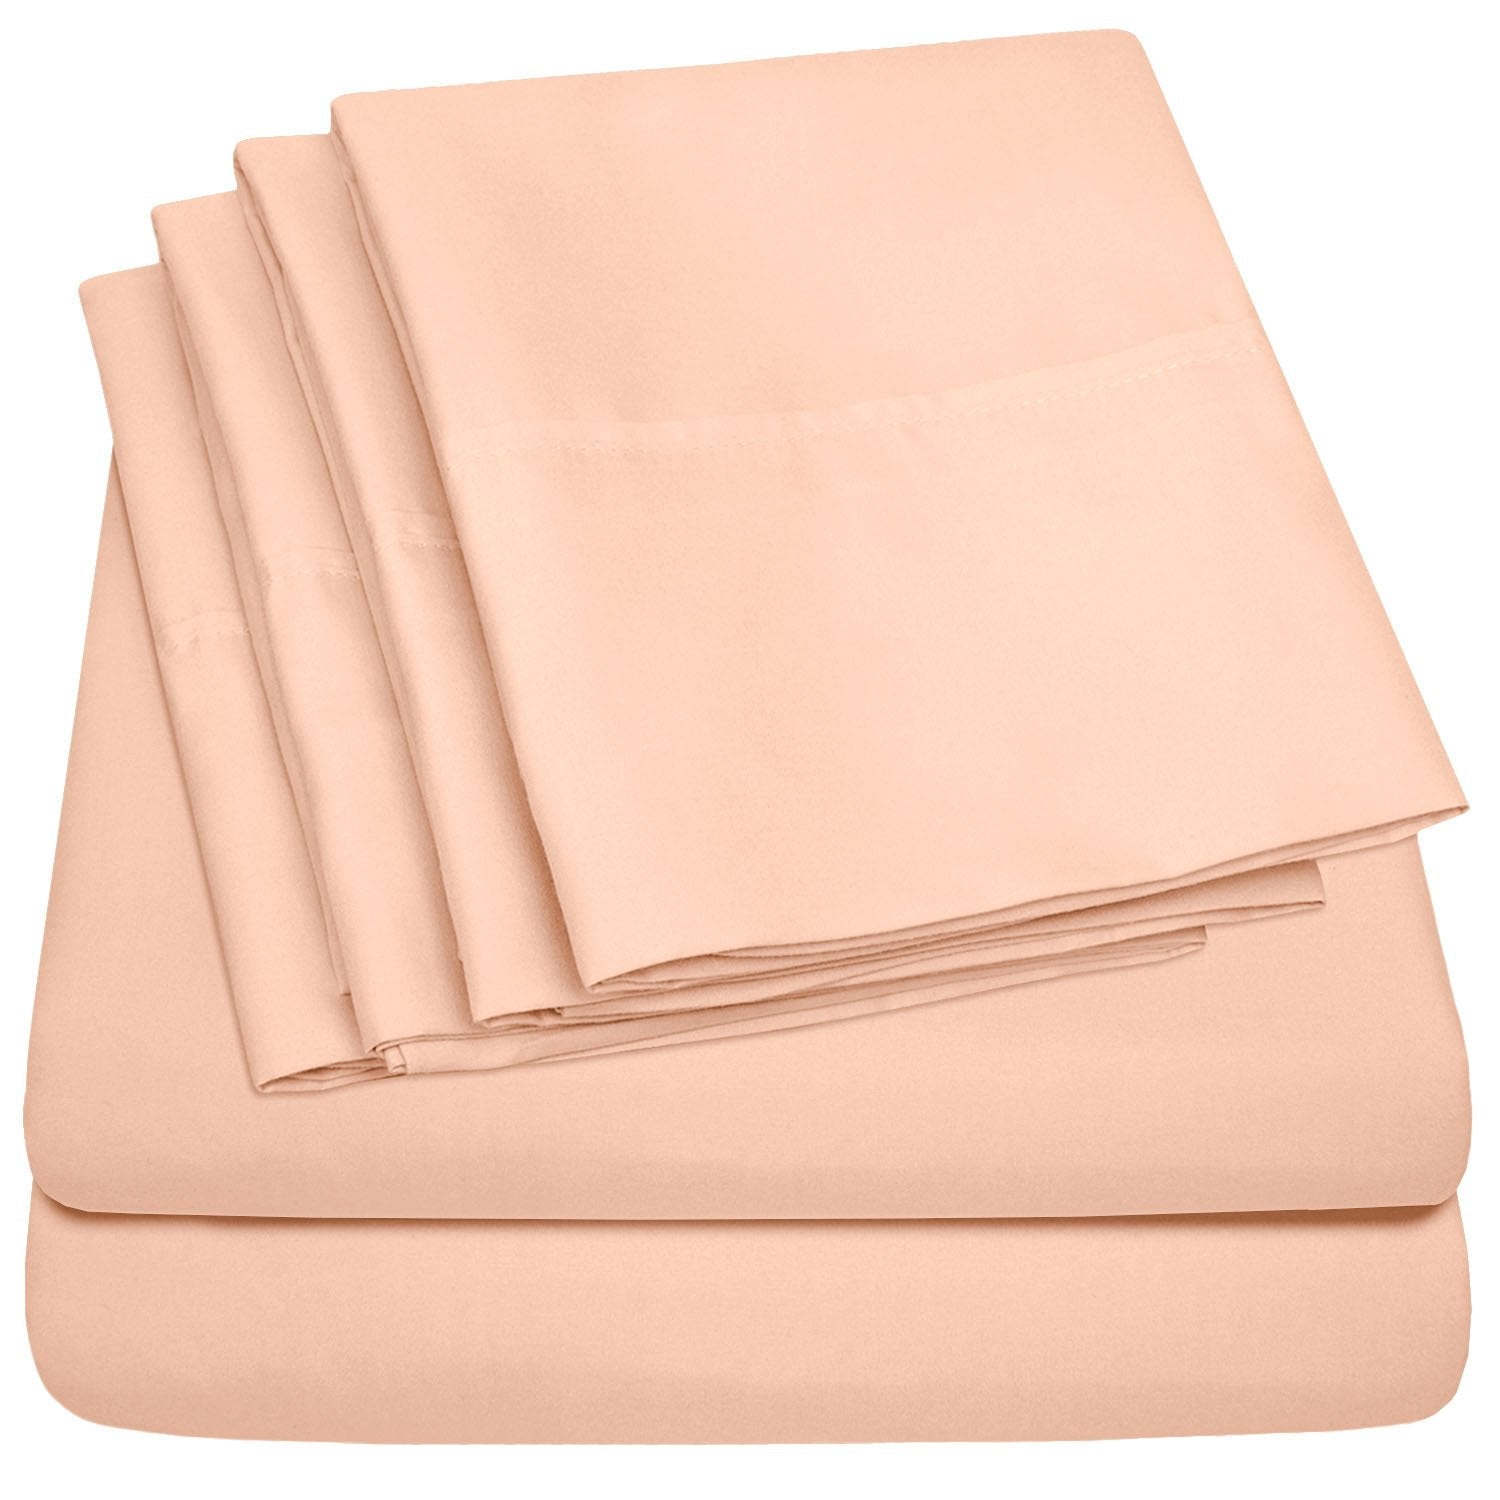 Deluxe 6-Piece Bed Sheet Set (Peach) - Folded